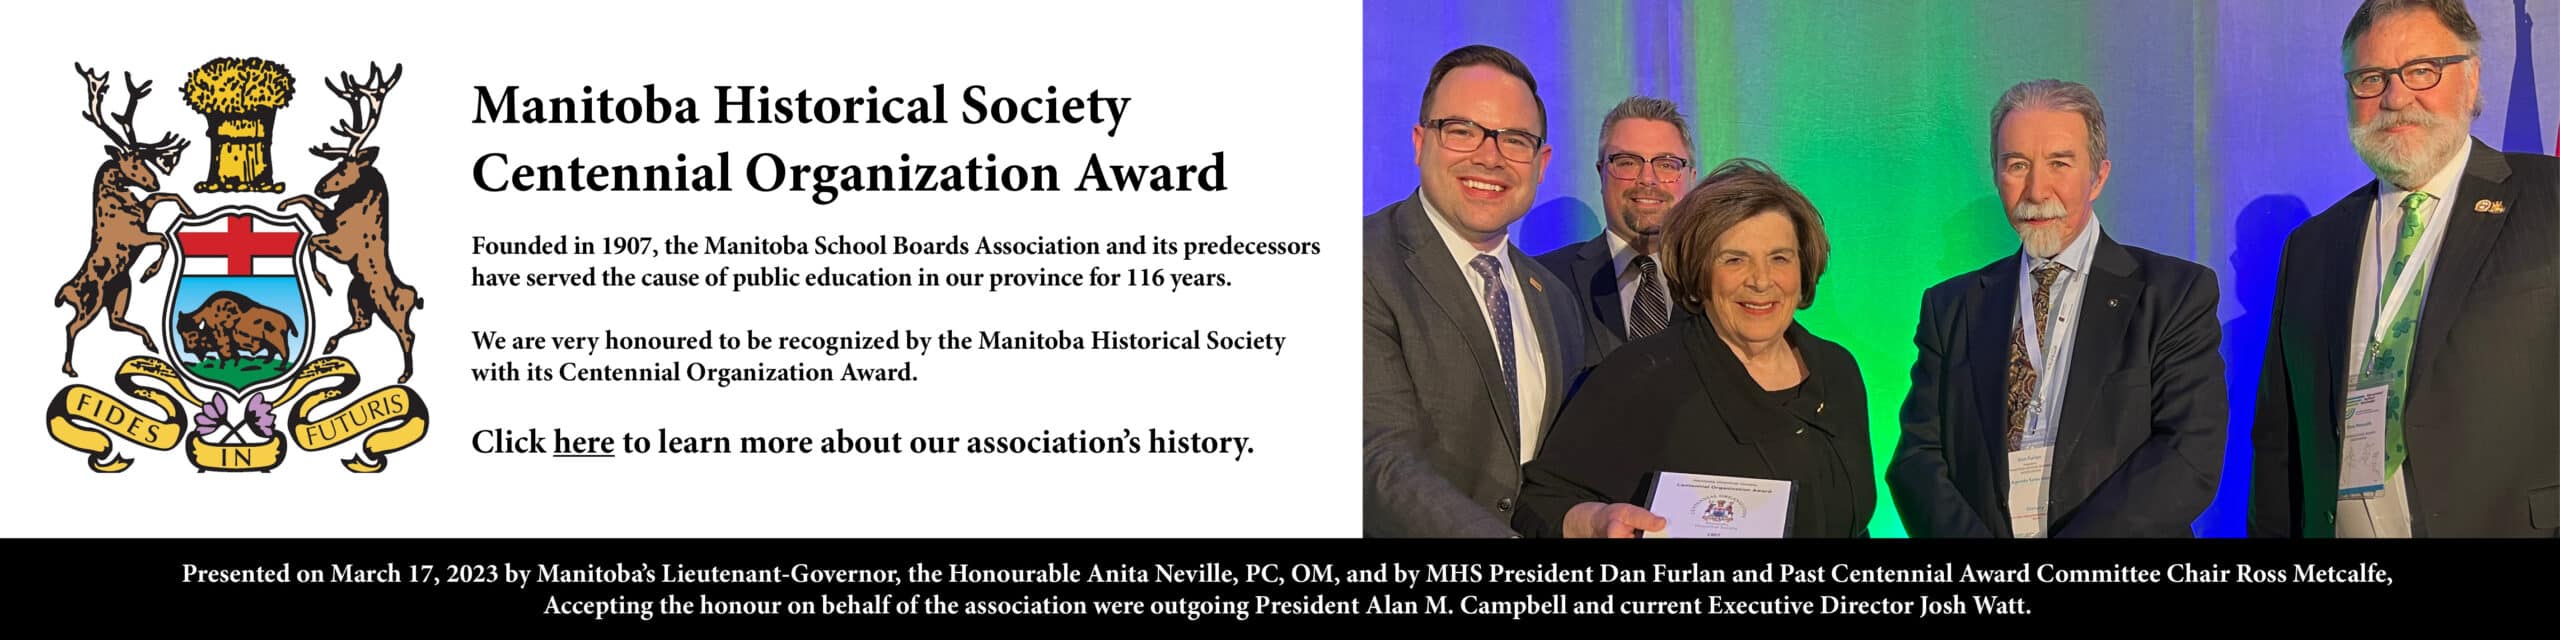 The banner includes an image of Manitoba's Lieutenant-Governor, the Honourable Anita Neville, and Manitoba Historical Society (MHS) President Dan Furlan and Past Centennial Award Committee Chair Ross Metcalfe presenting an award to outgoing Manitoba School Boards Association (MSBA) President Alan Campbell and current Executive Director, Josh Watt an award. The text reads Manitoba Historical Society Centennial Organization Award. Founded in 1907, the Manitoba School Boards Association and its predecessors have served the cause of public education in our province for 116 years. We are very honoured to be recognized by the Manitoba Historical Society with the Centennial Organization Award. Click here to learn more about our association's history. The banner is linked to the MHS website.